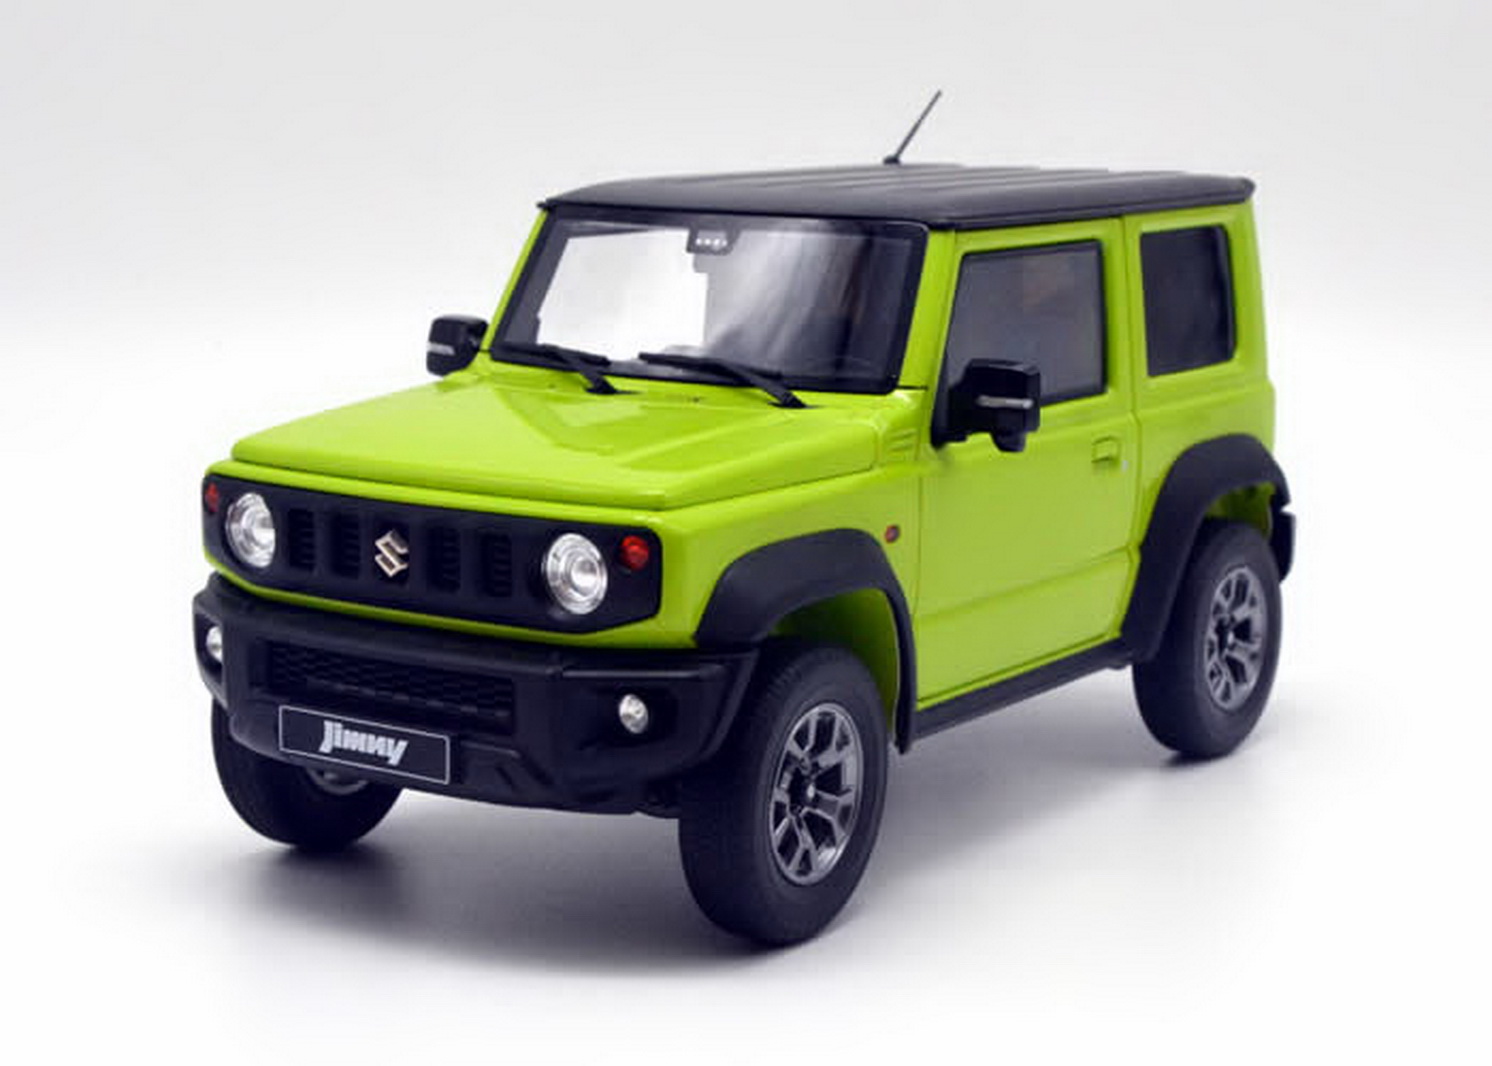 Details about   LCD 1/18 Scale Suzuki Jimny SUV Jungle Green Diecast Model Car Toy Collection 